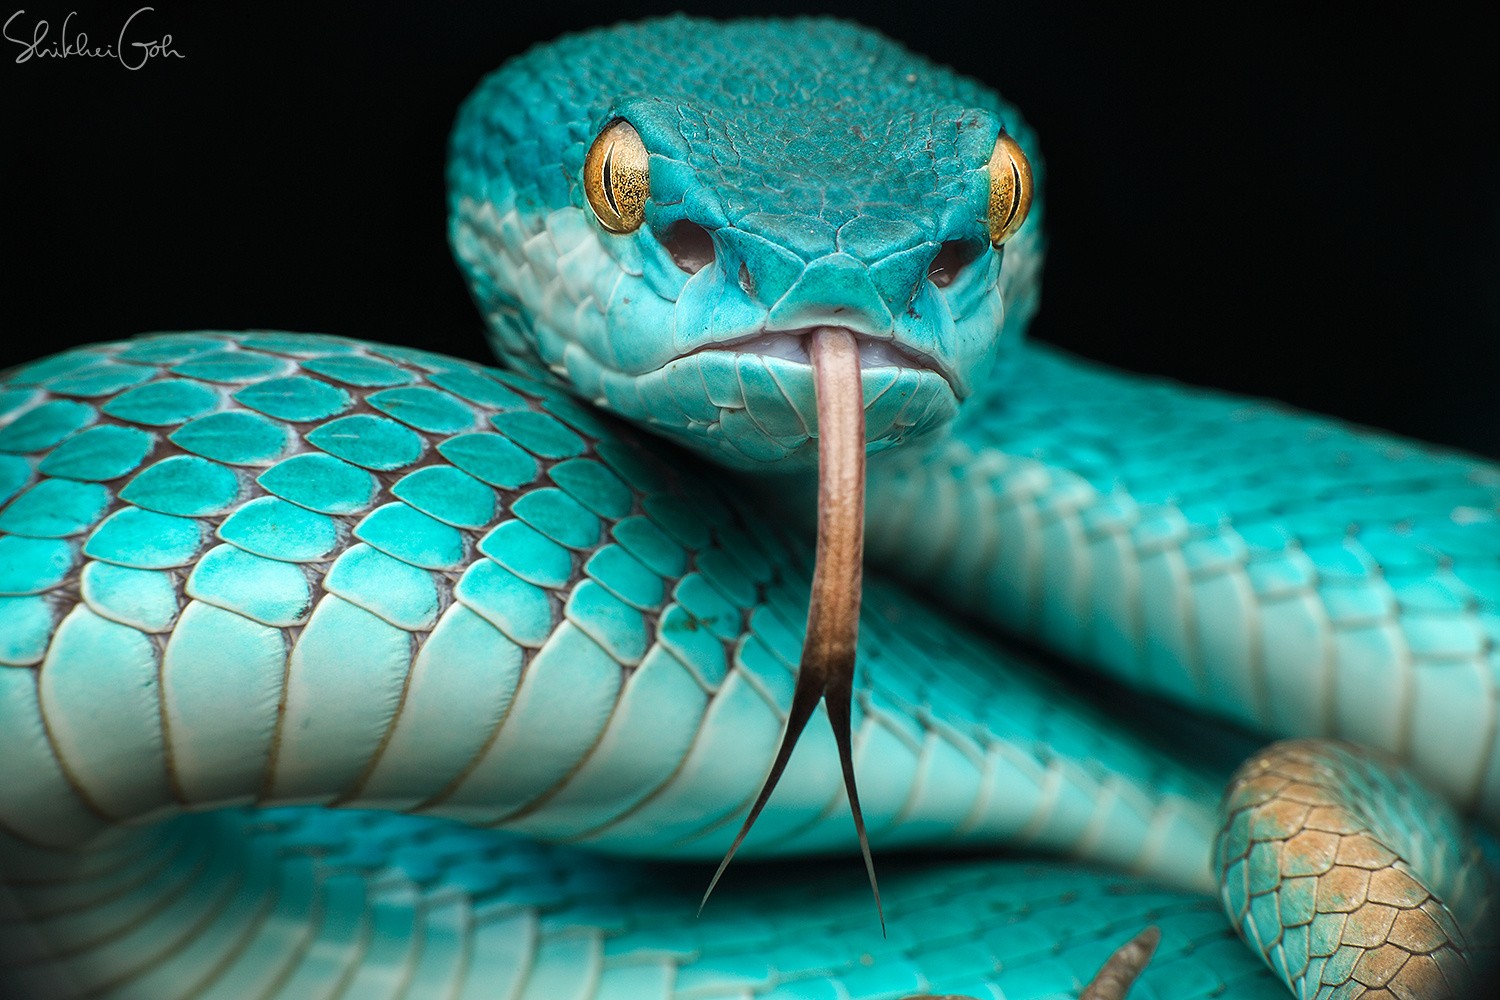 General 1500x1000 turquoise snake reptiles animals